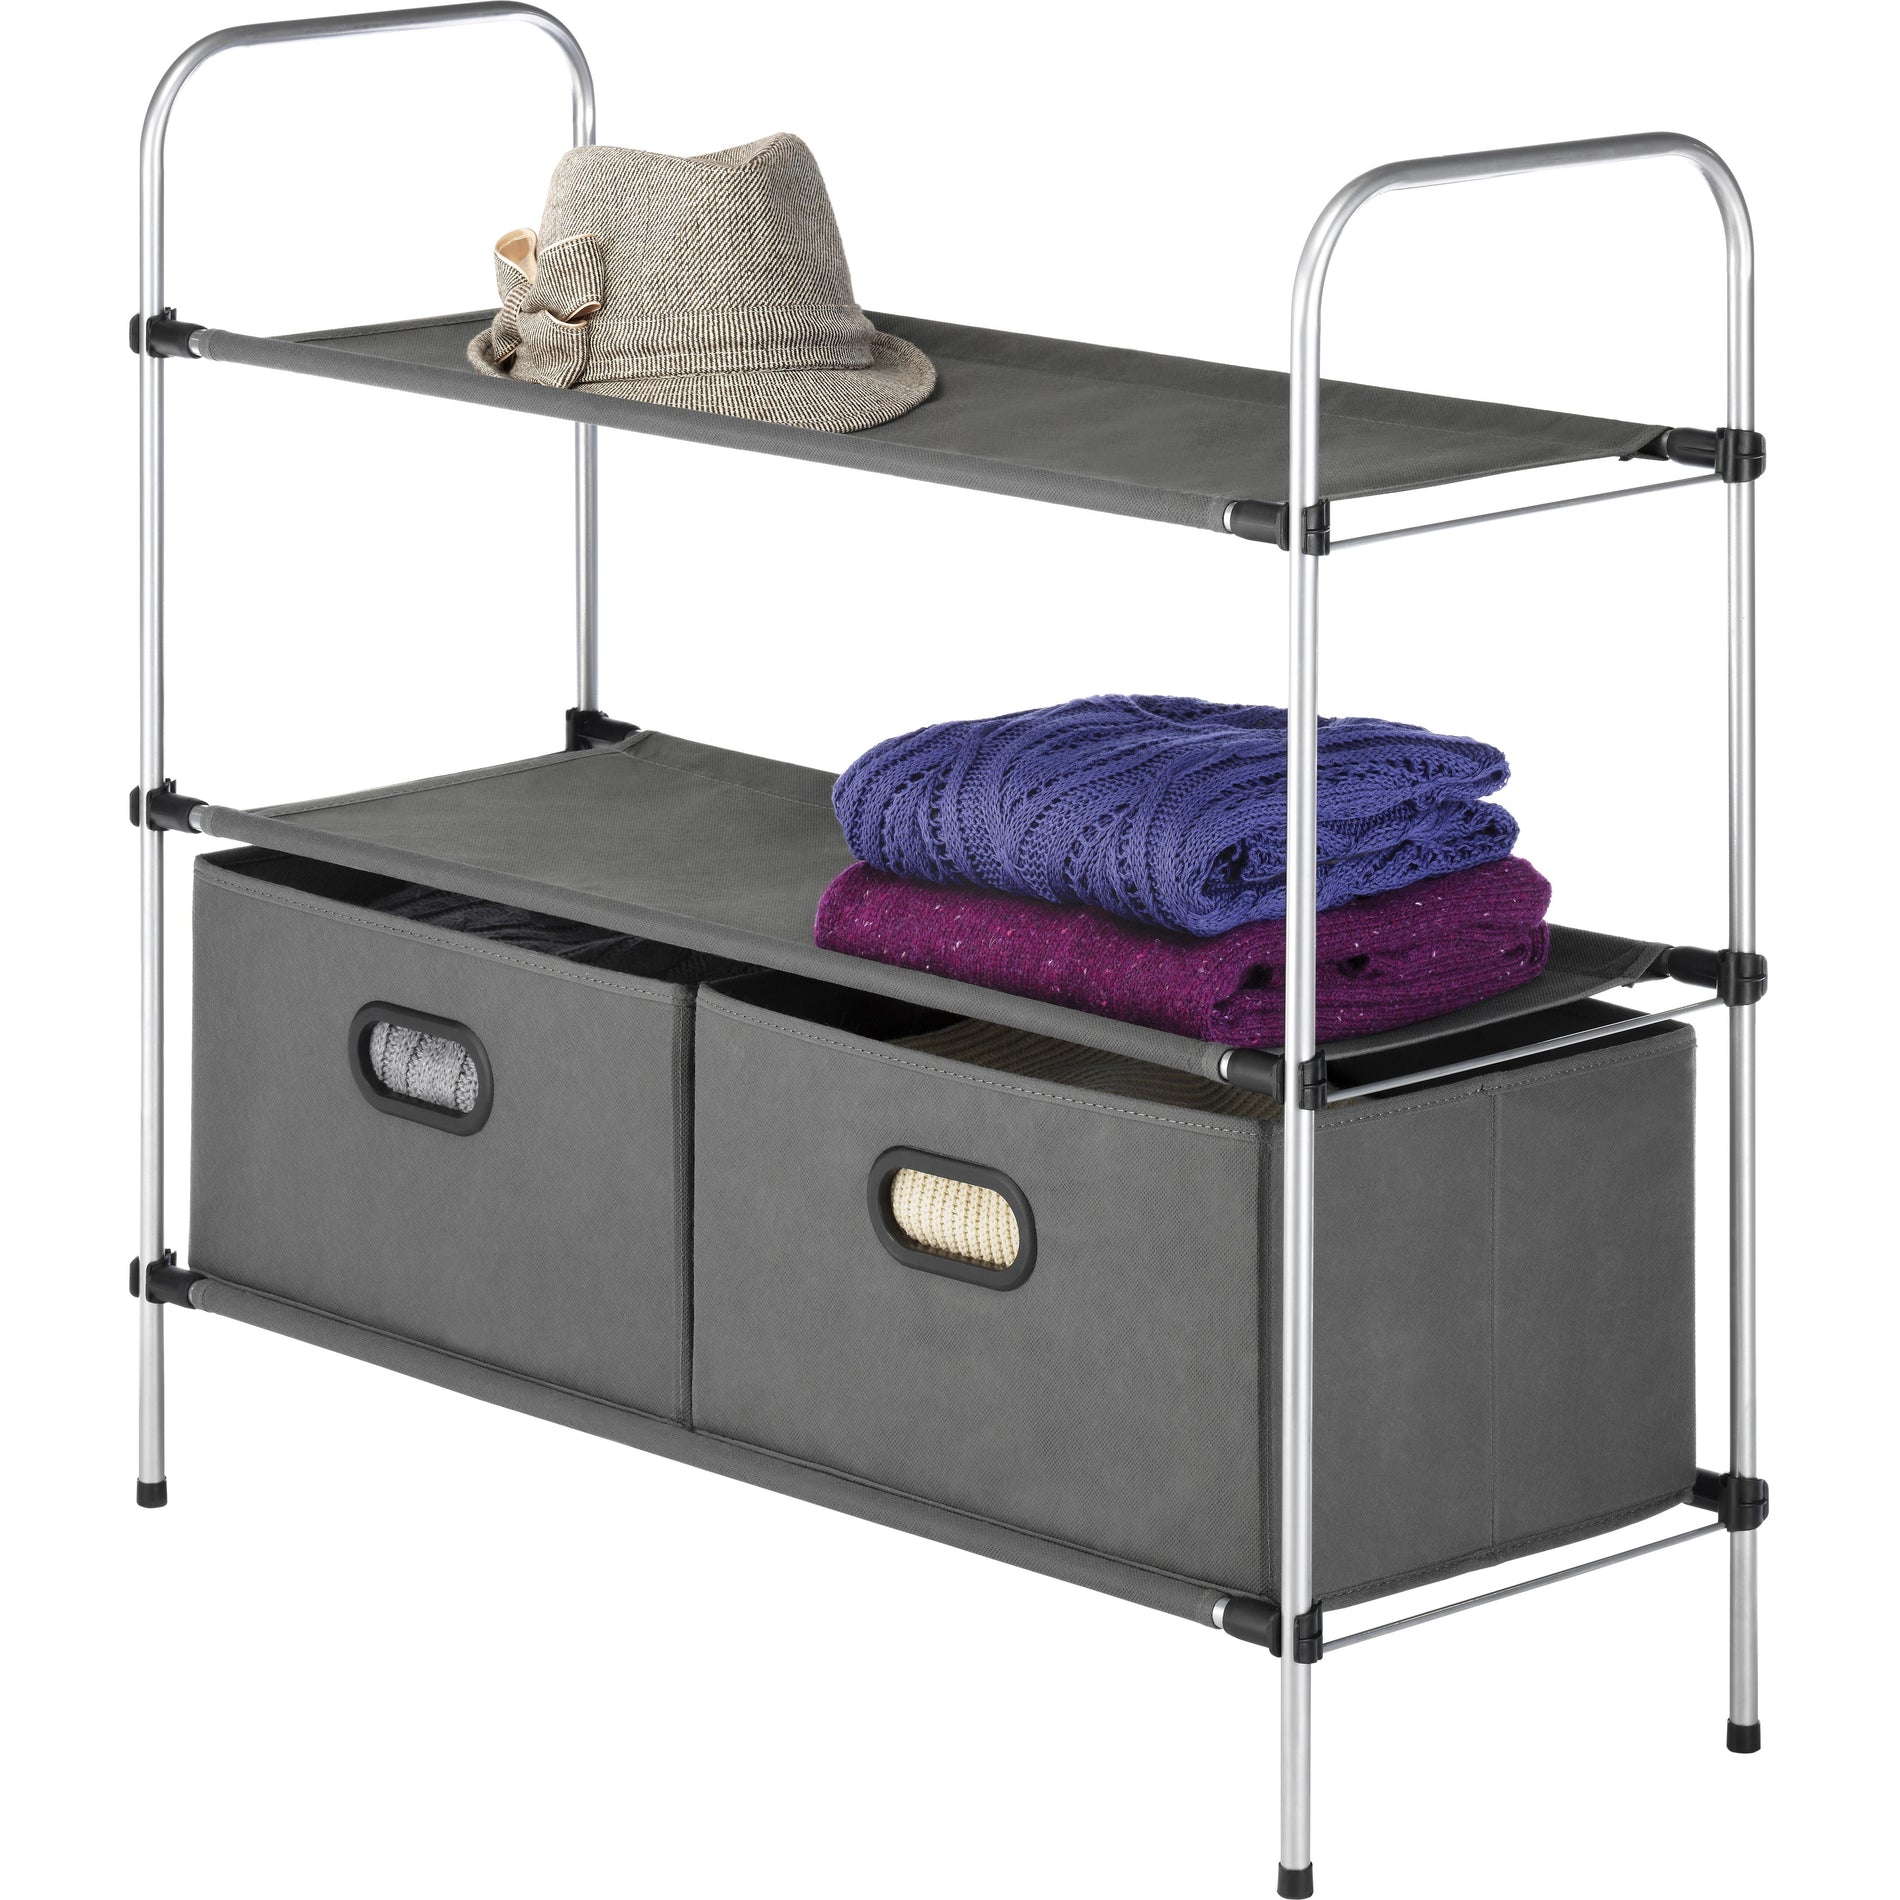 Whitmor 6779-4464 Storage Rack, Closet Organizer Collection, Breathable, 3 Tiers, 2 Drawers, Gray